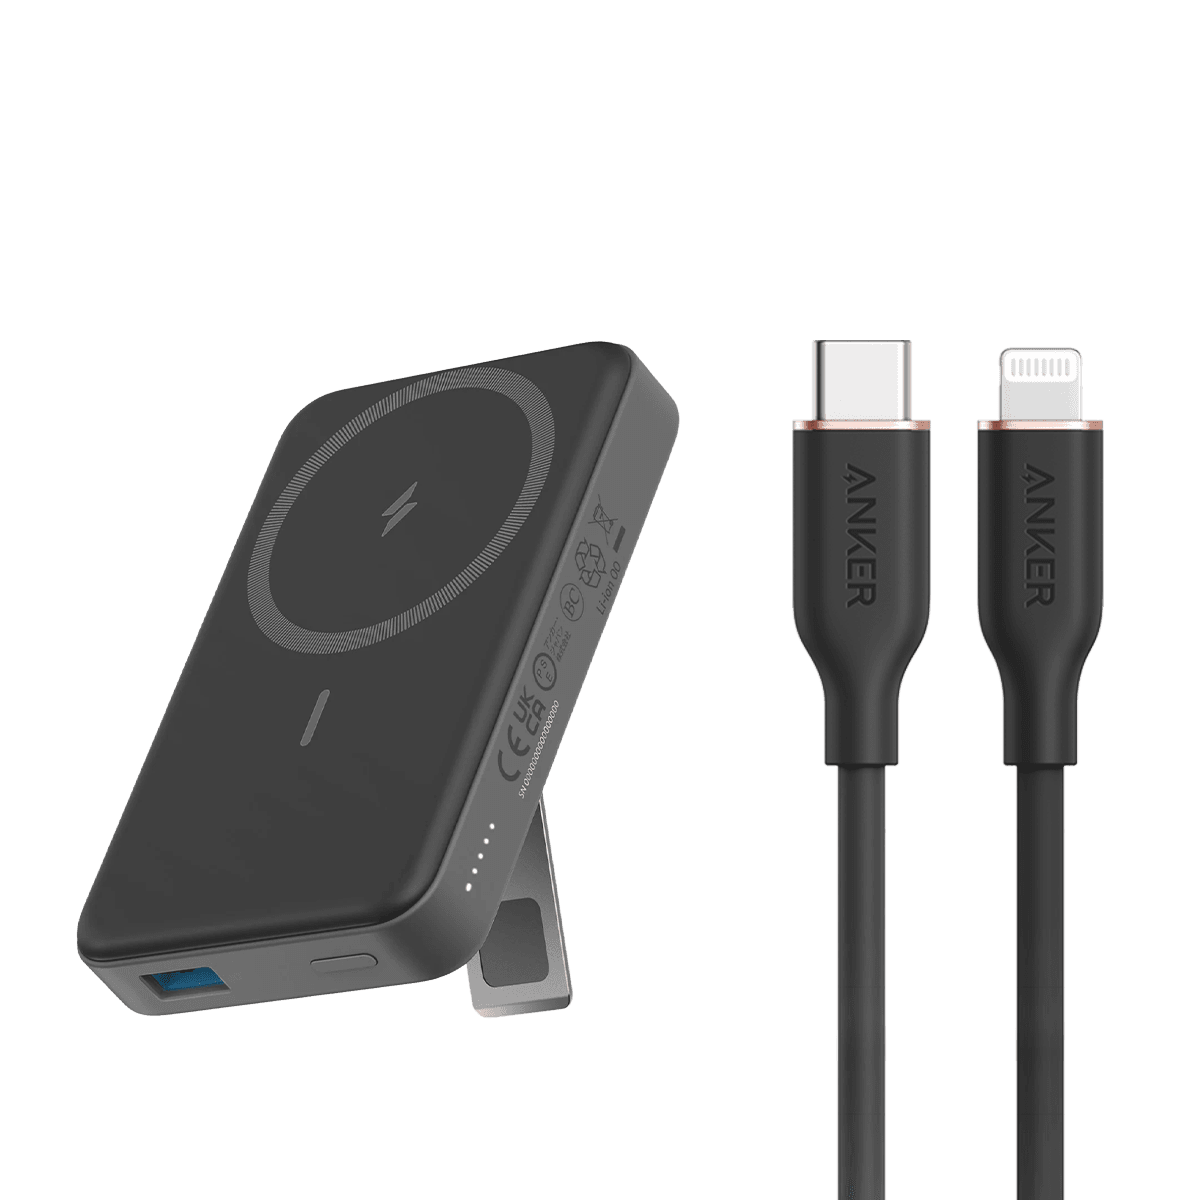 Anker <b>641</b> USB-C to Lightning Cable (Flow, Silicone) and Anker <b>633</b> Magnetic Battery